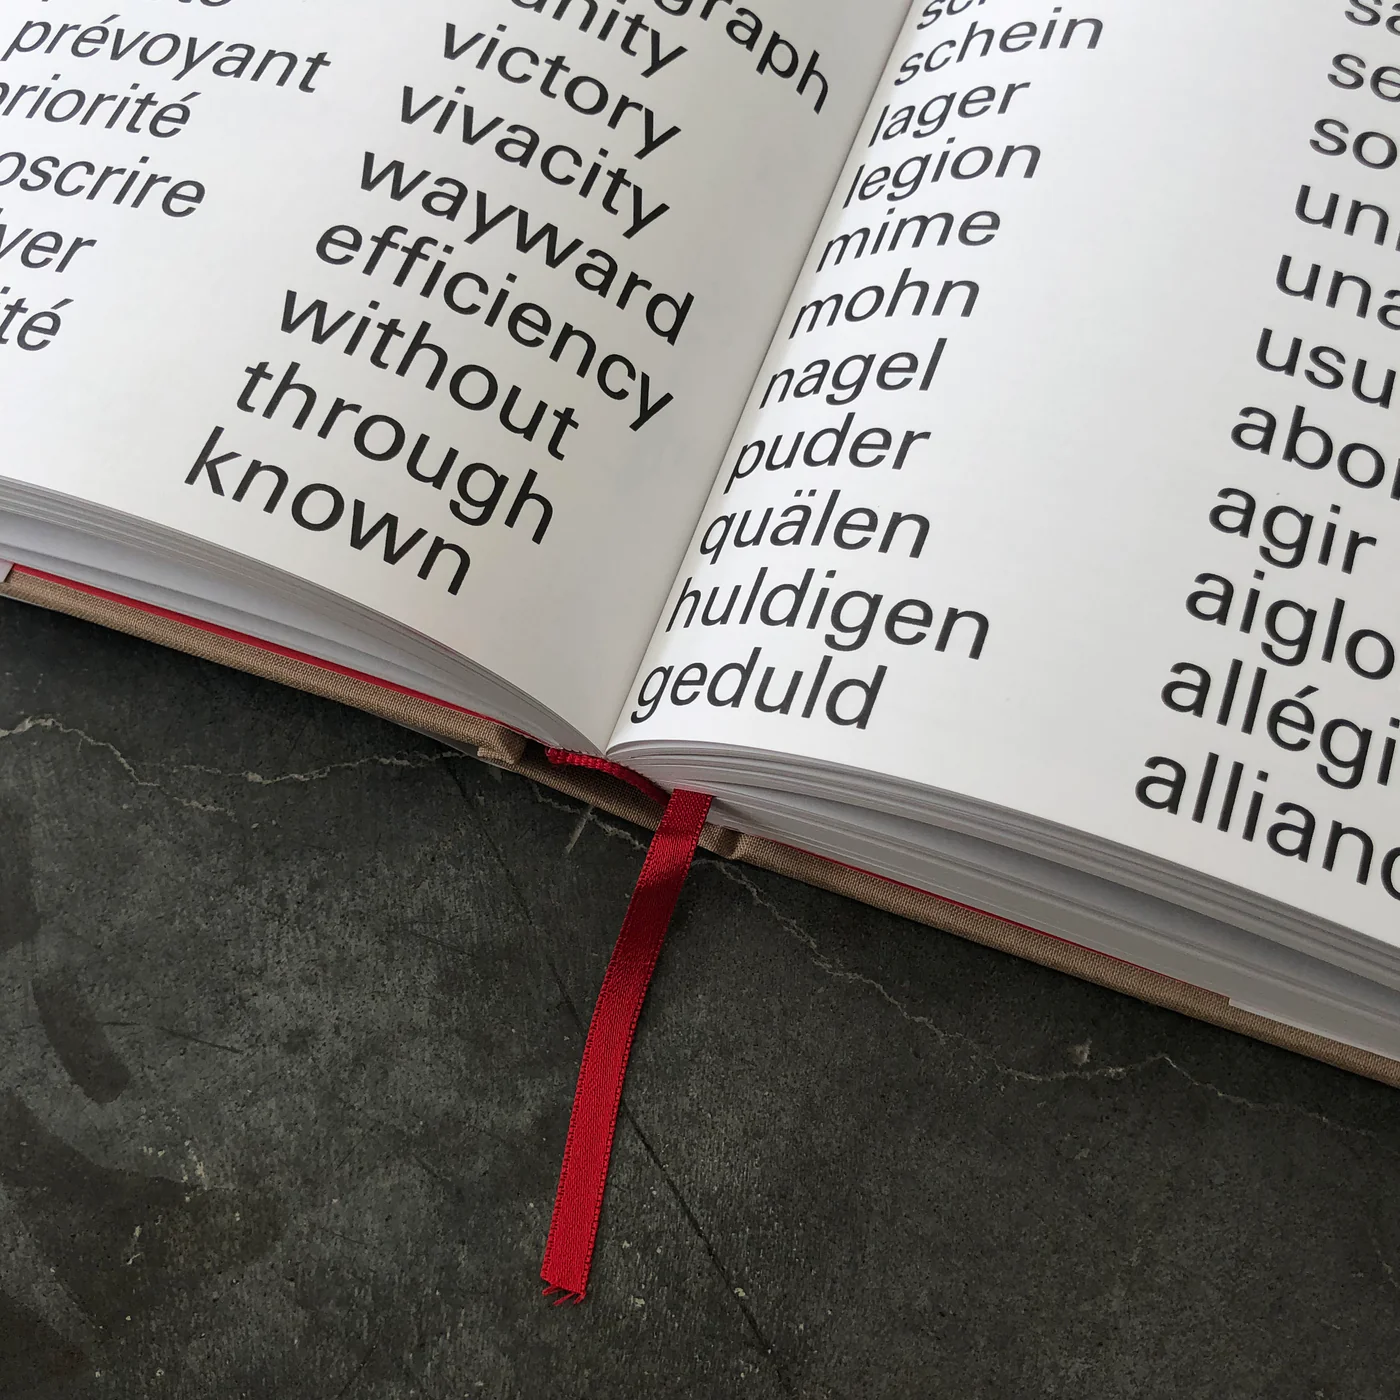 Typographie: A Manual of Design by Emil Ruder